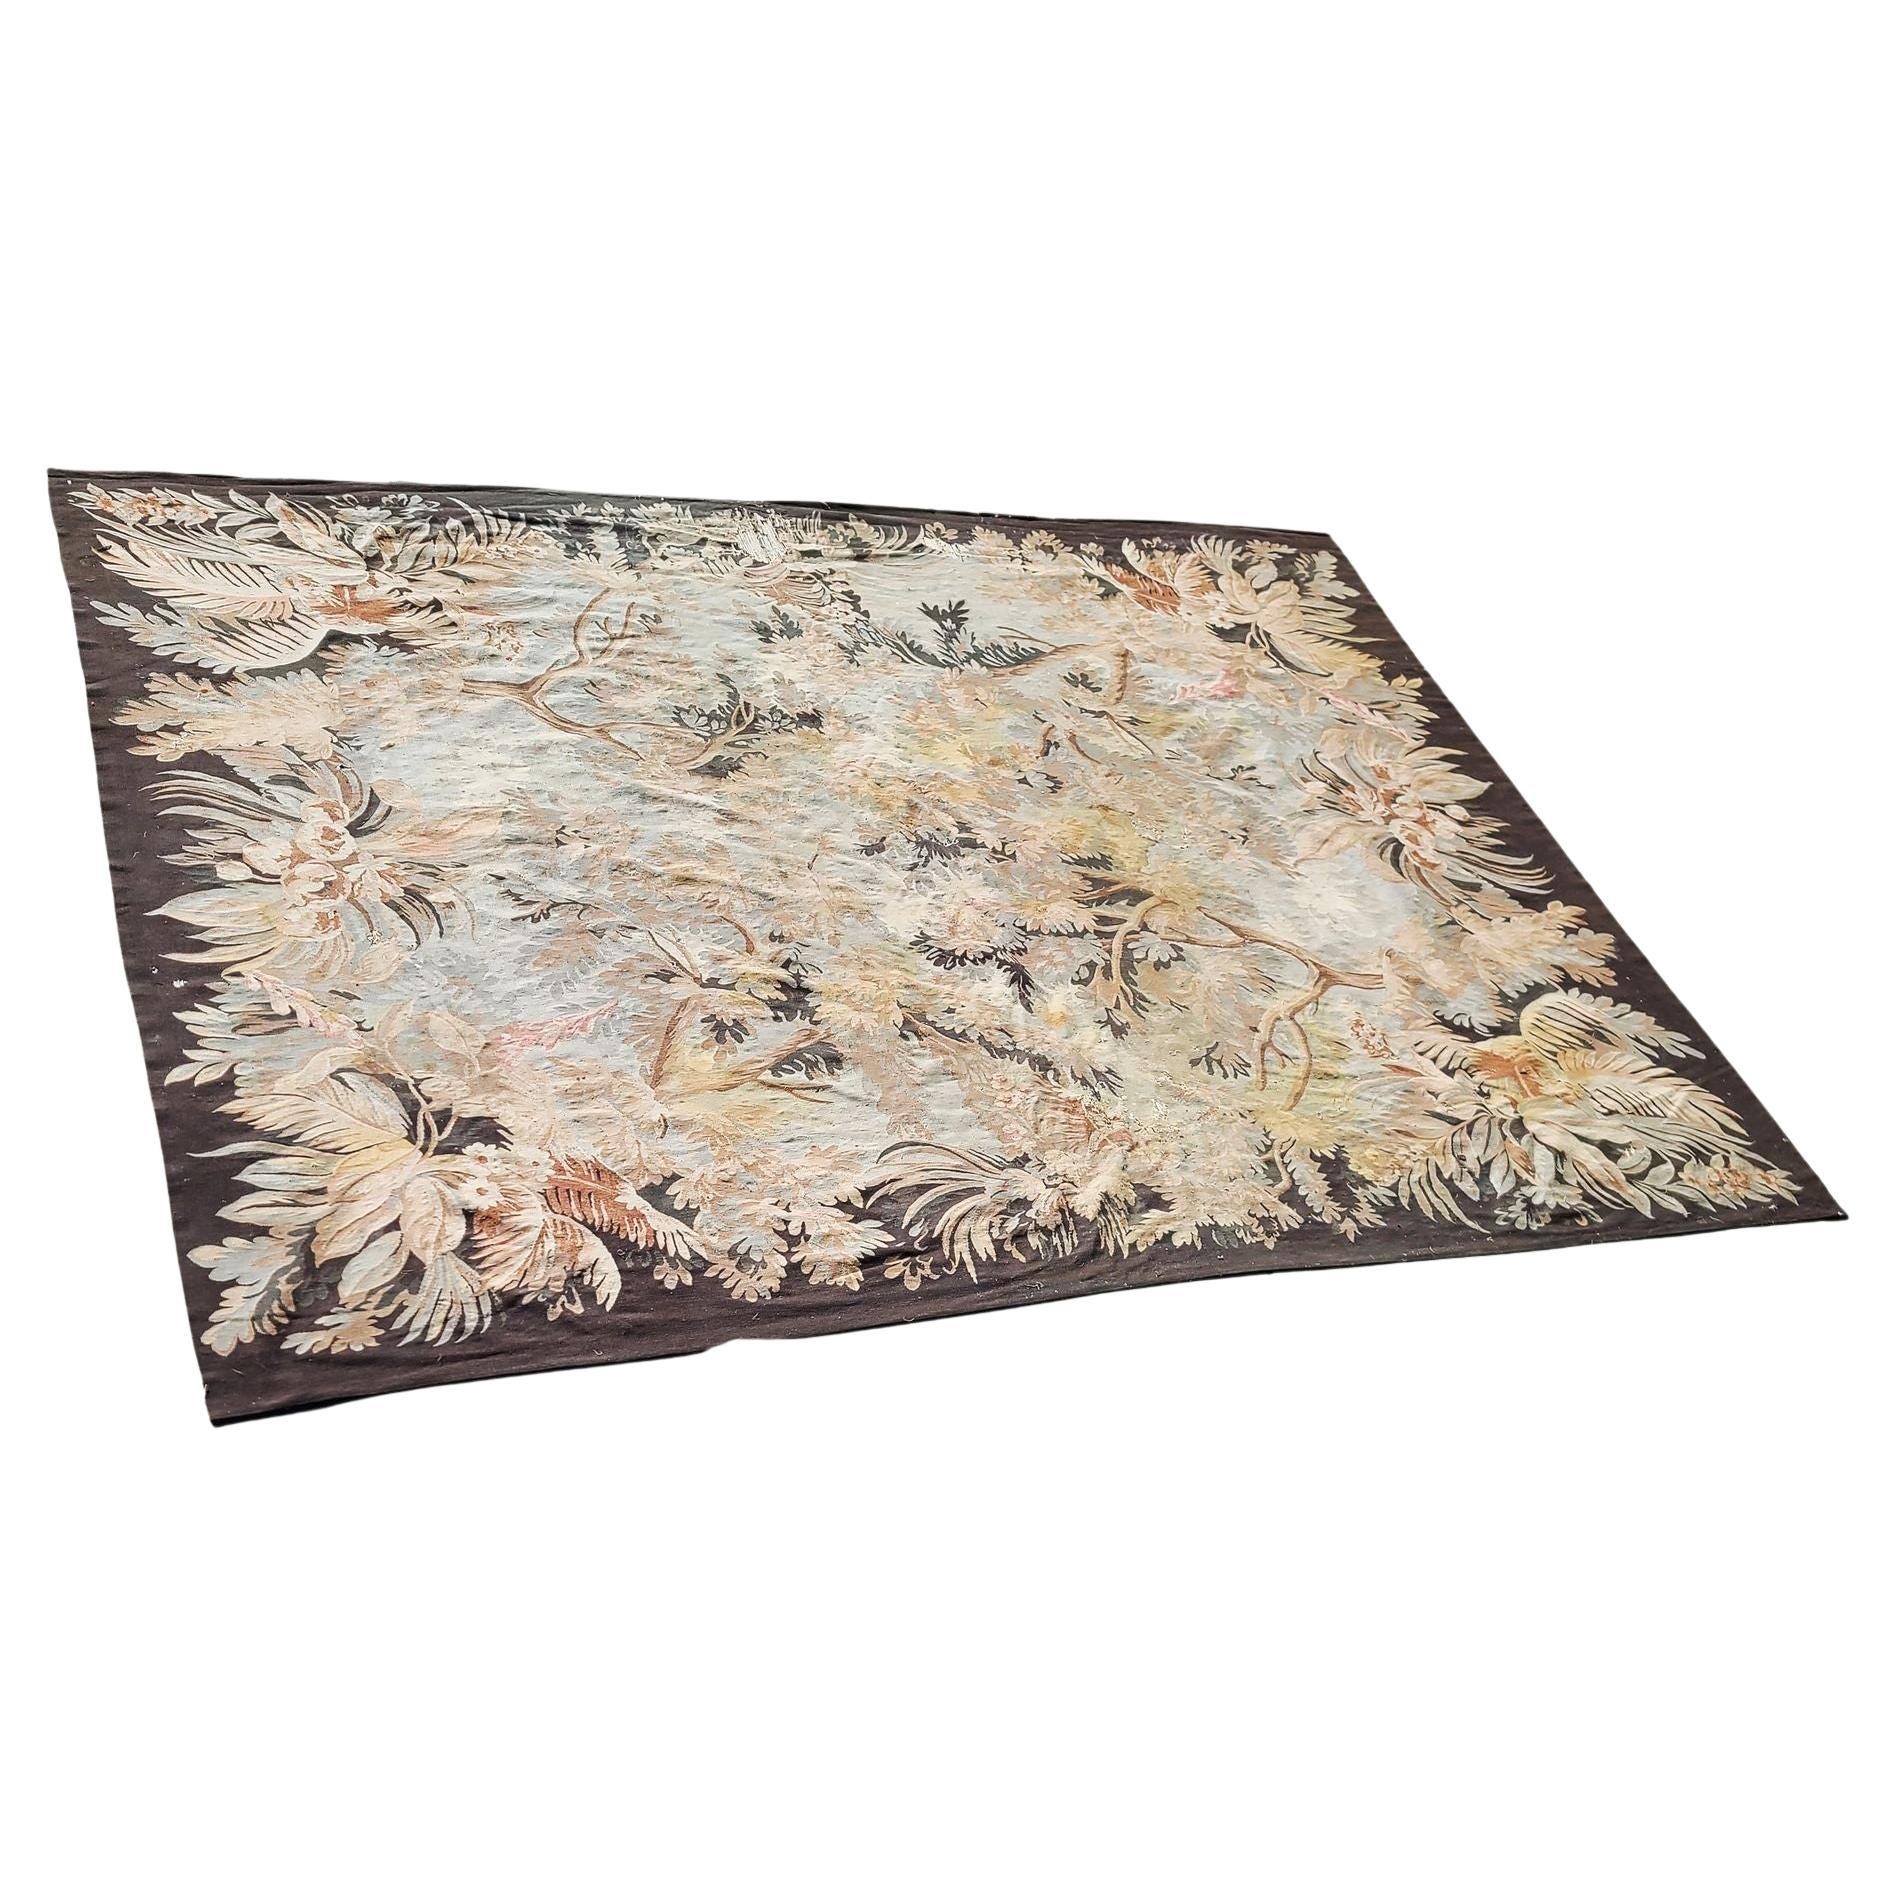 14' Foot Trans Atlantic Wool Tropical Palm Theme Area Rug For Sale